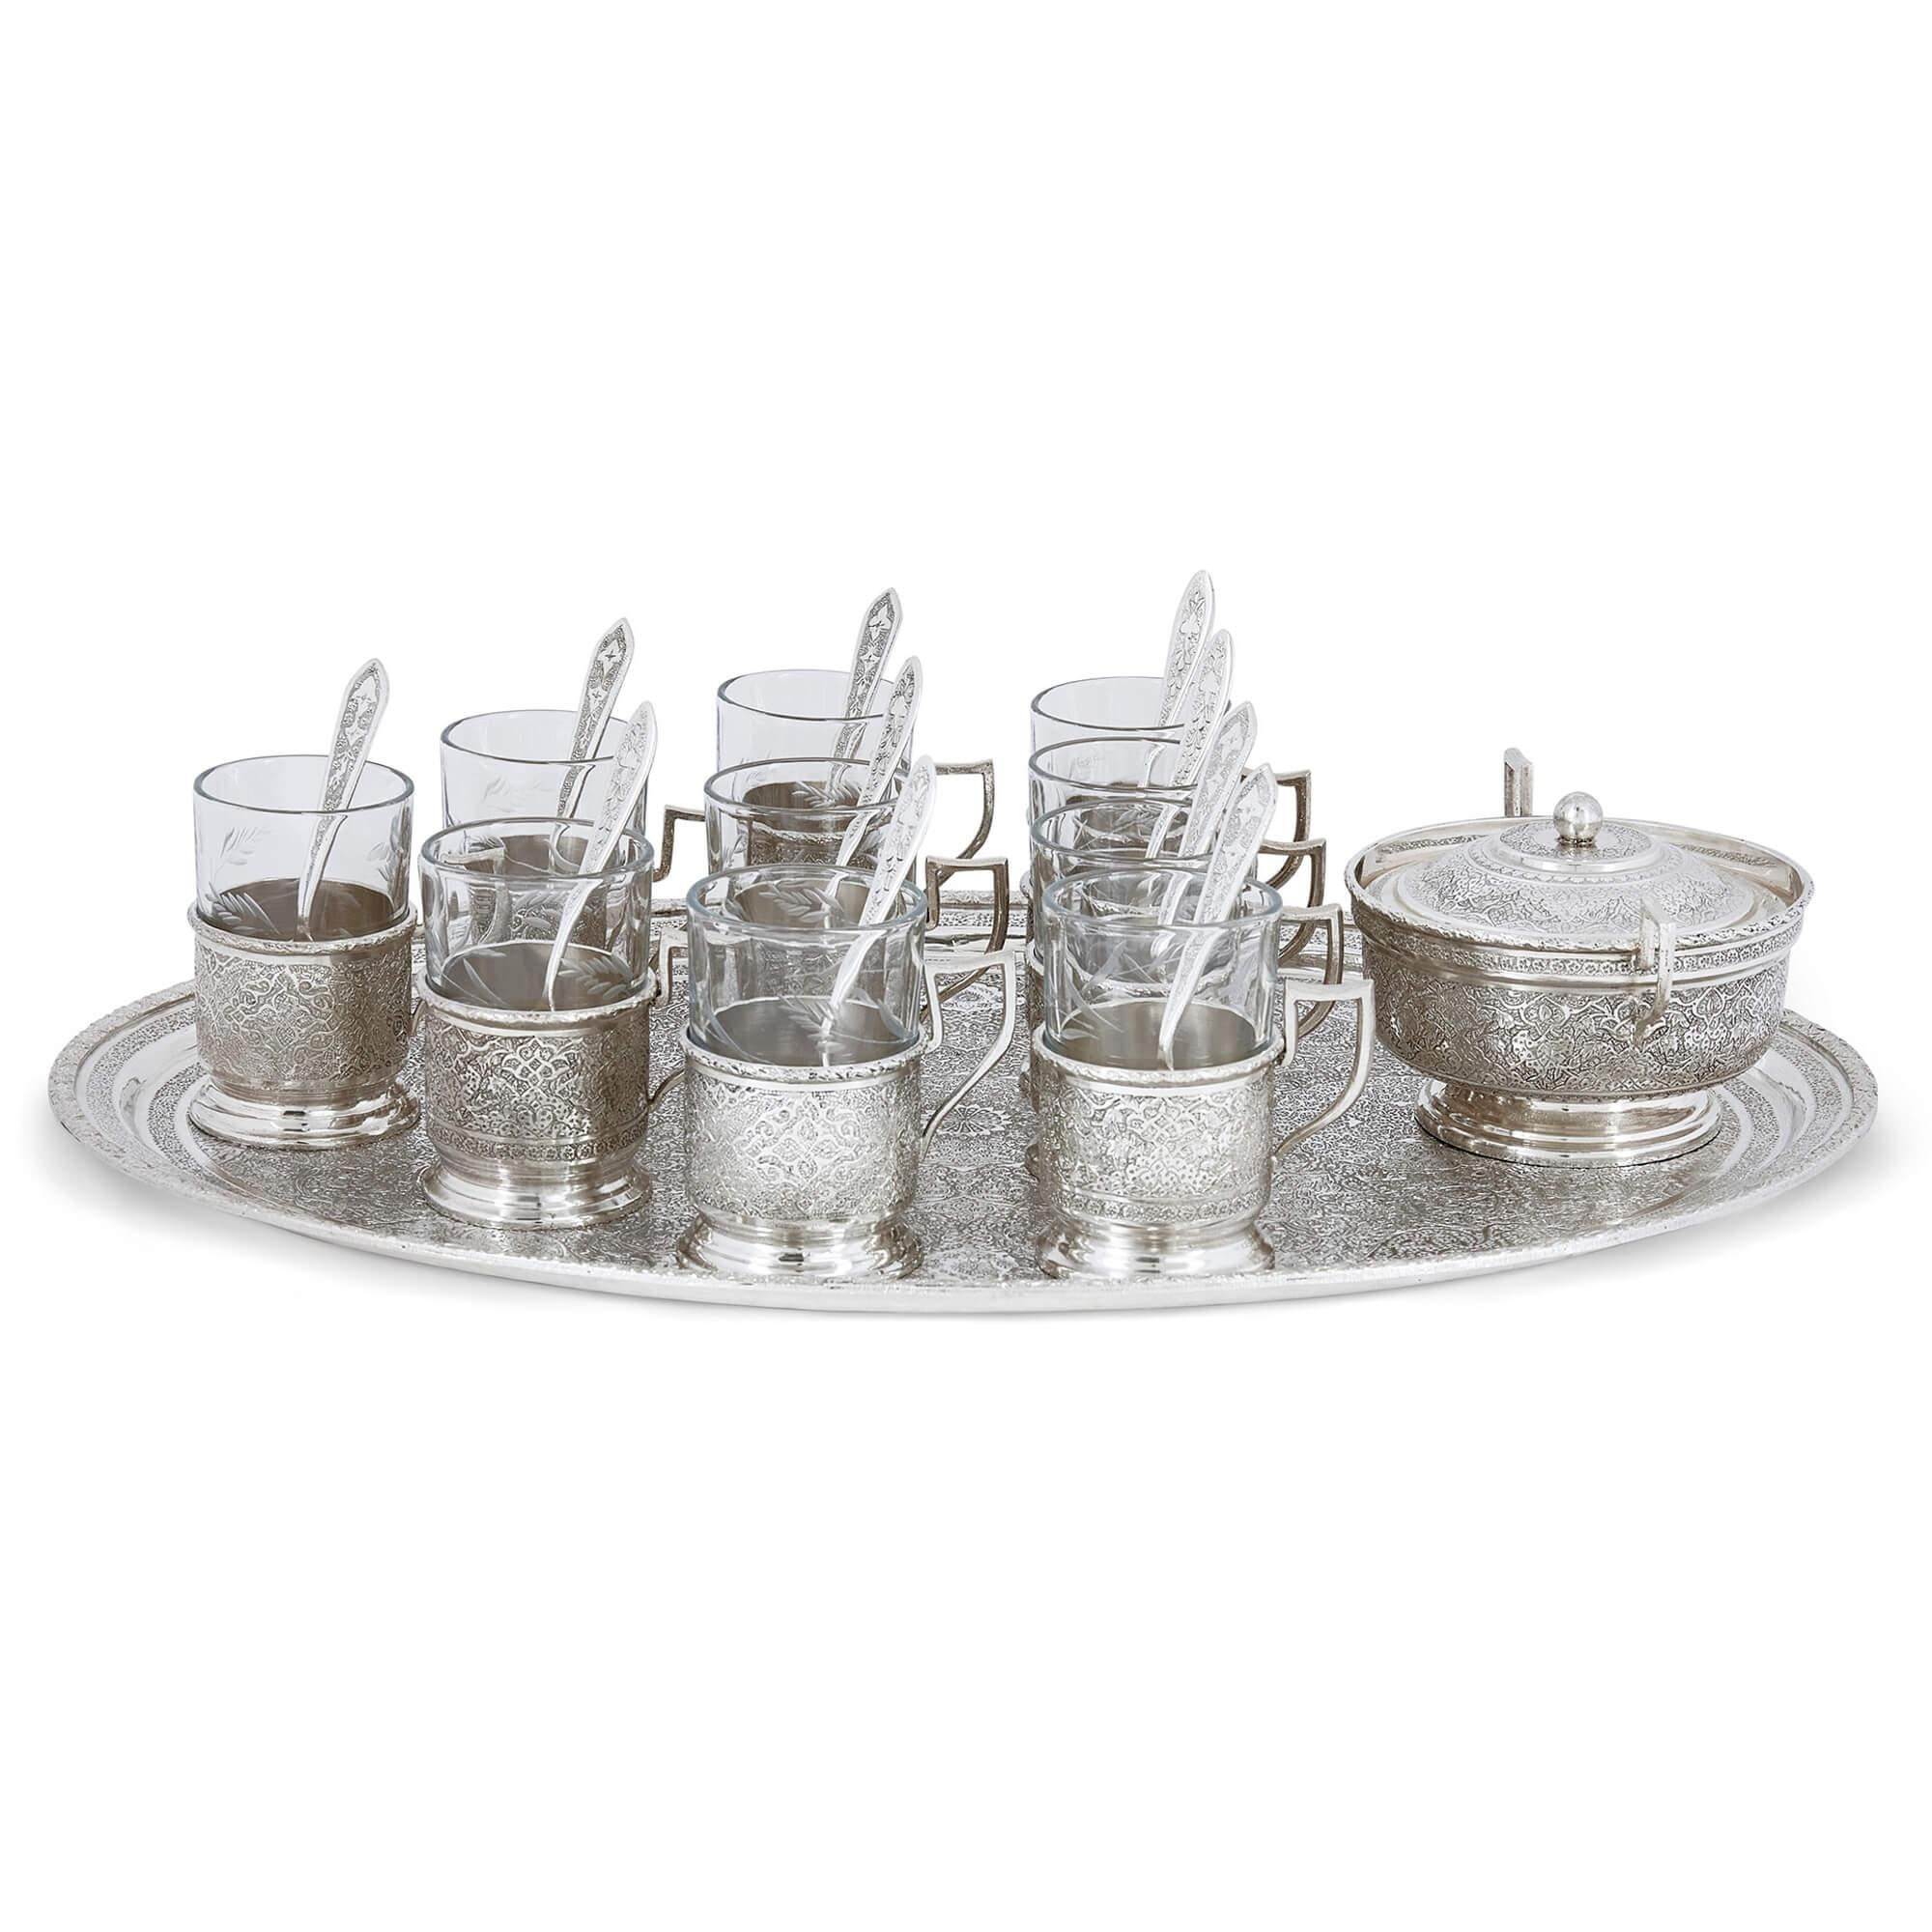 Persian engraved glass and silver part-drinks service 
Persian, 20th Century
Tray: Height 2cm, width 43.5cm, depth 29.5cm
Cups: Height 8cm, width 7.5cm, depth 5cm

Showcasing sensational engraving of Persian design, this glassware set is comprised